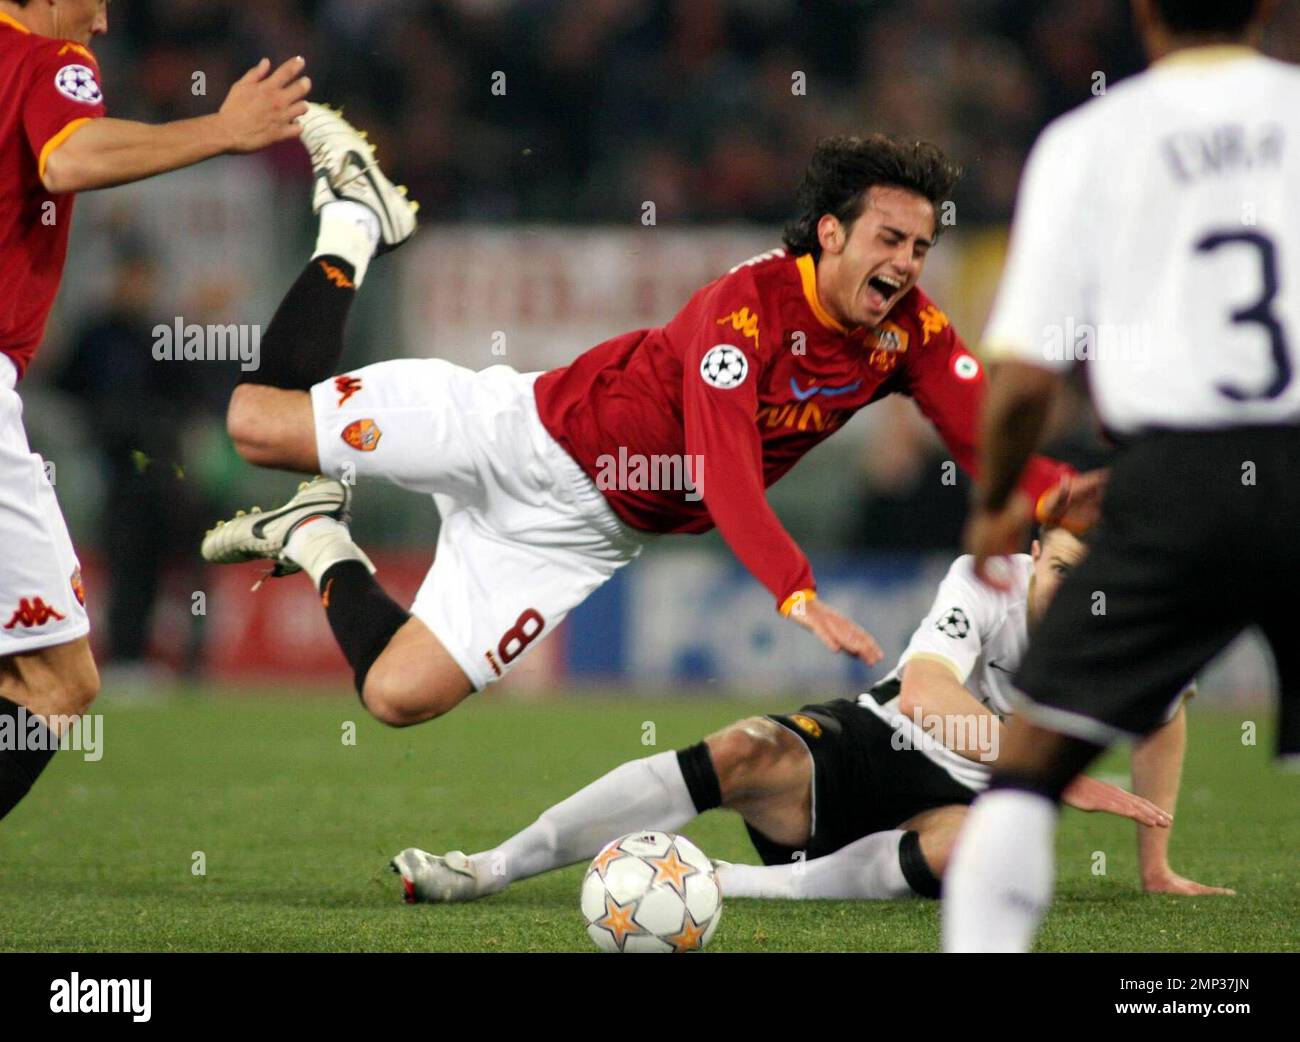 Roma Player Alberto Aquilani during the match Roma-Manchester United for the 2008 Champions League quarterfinals in the Olympic Stadium. Roma loses the match 0-2. Rome, Italy. 4/1/08. Stock Photo